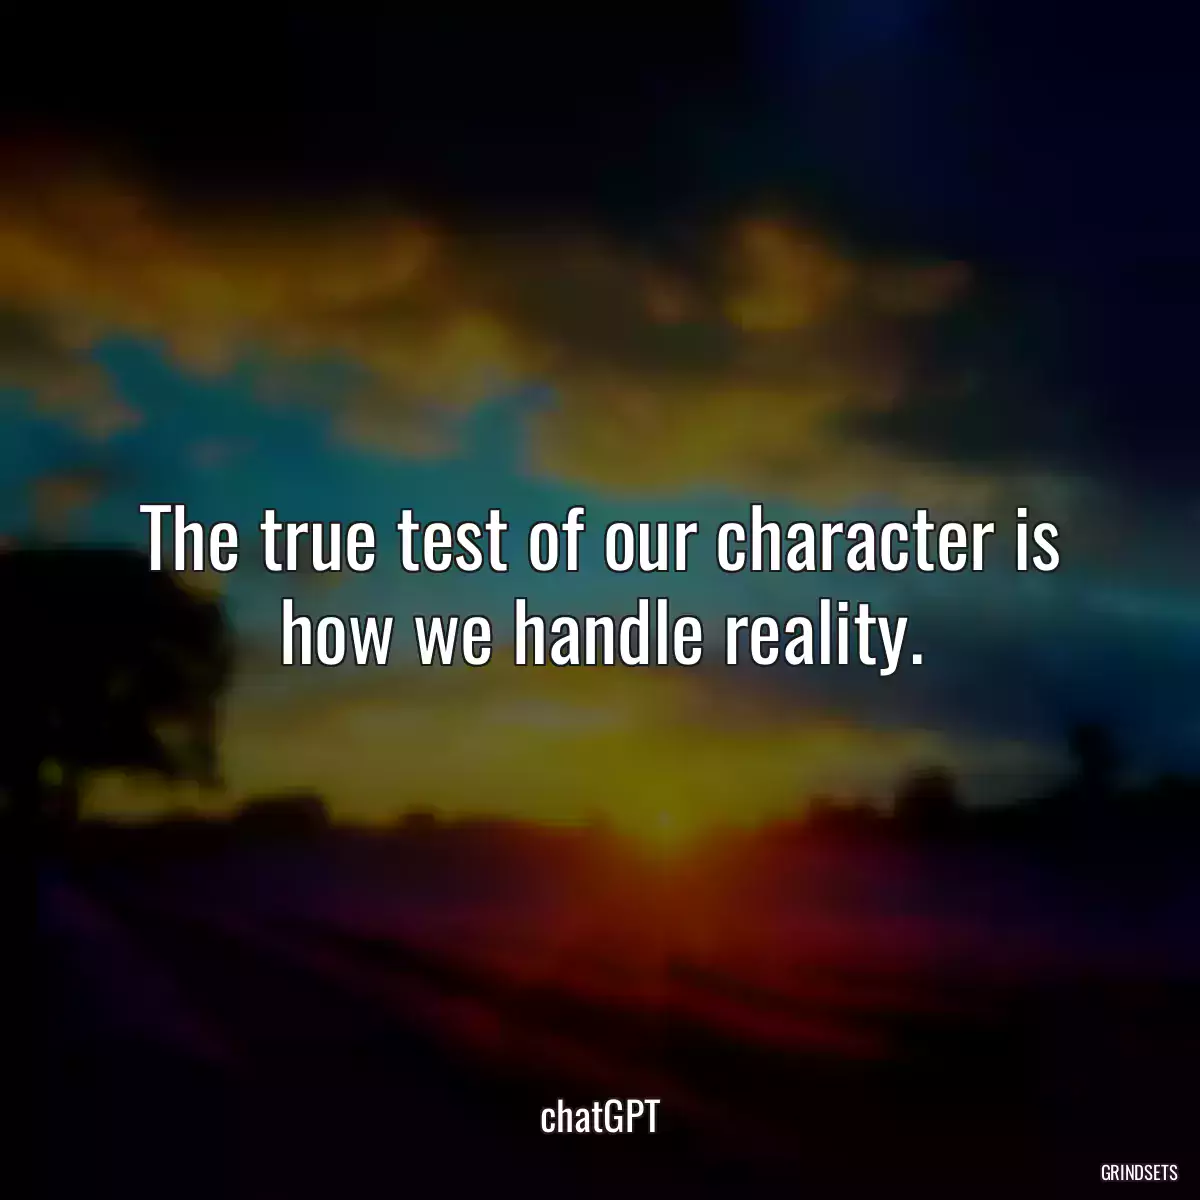 The true test of our character is how we handle reality.